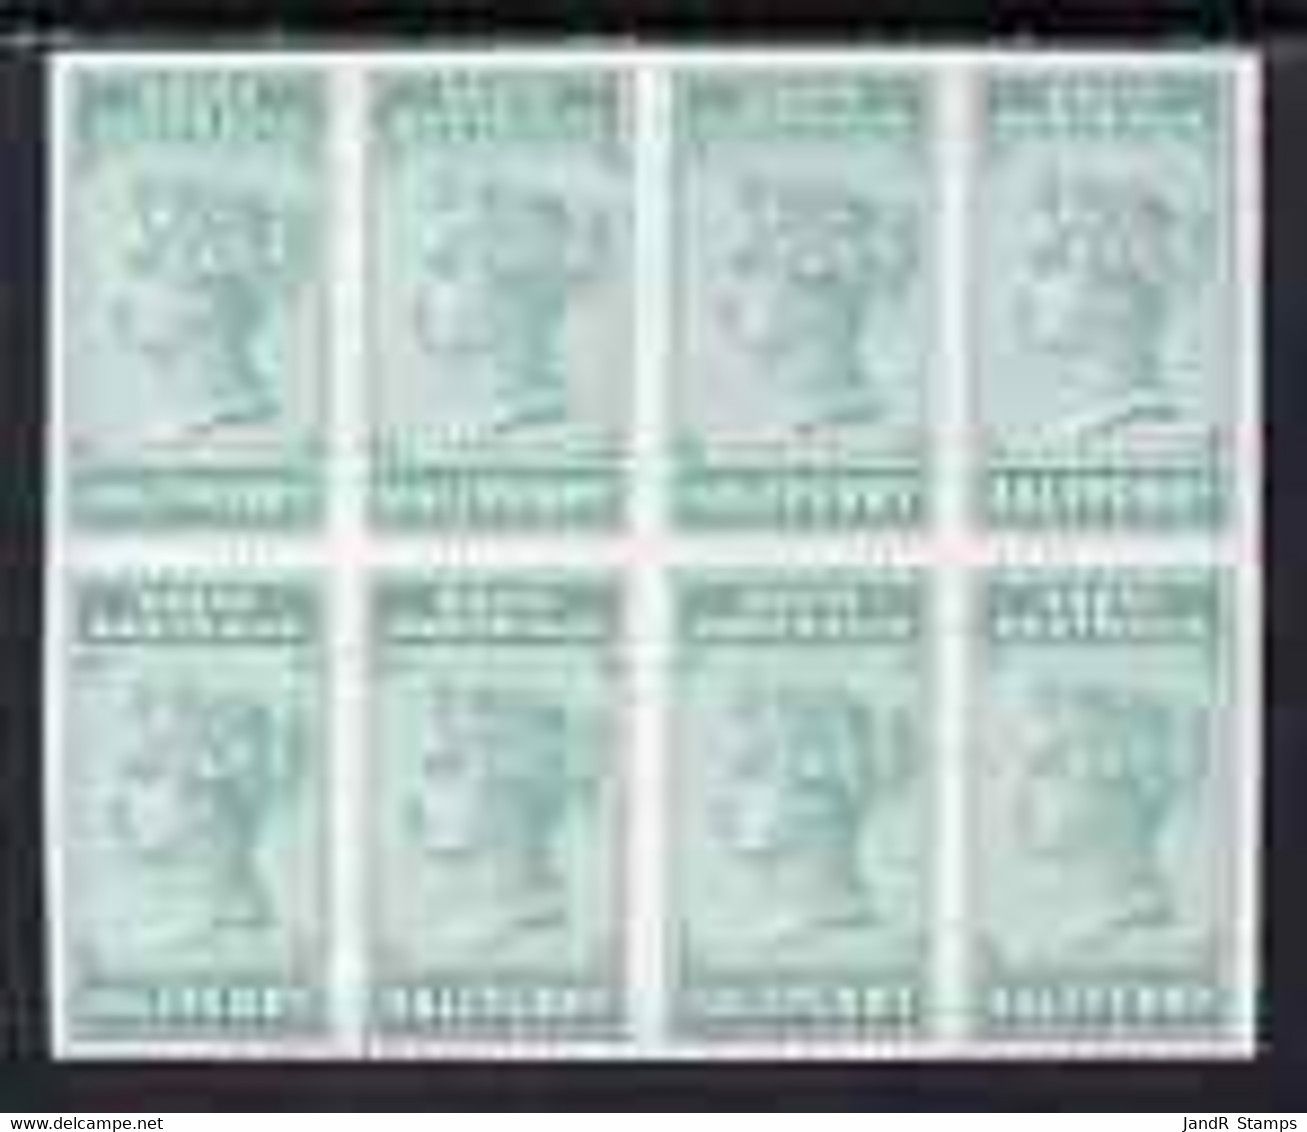 South Australia 1886 1/2d Imperf Proof Block Of 8 In Blue-green Unwatermarked U/m As SG 182 - Mint Stamps